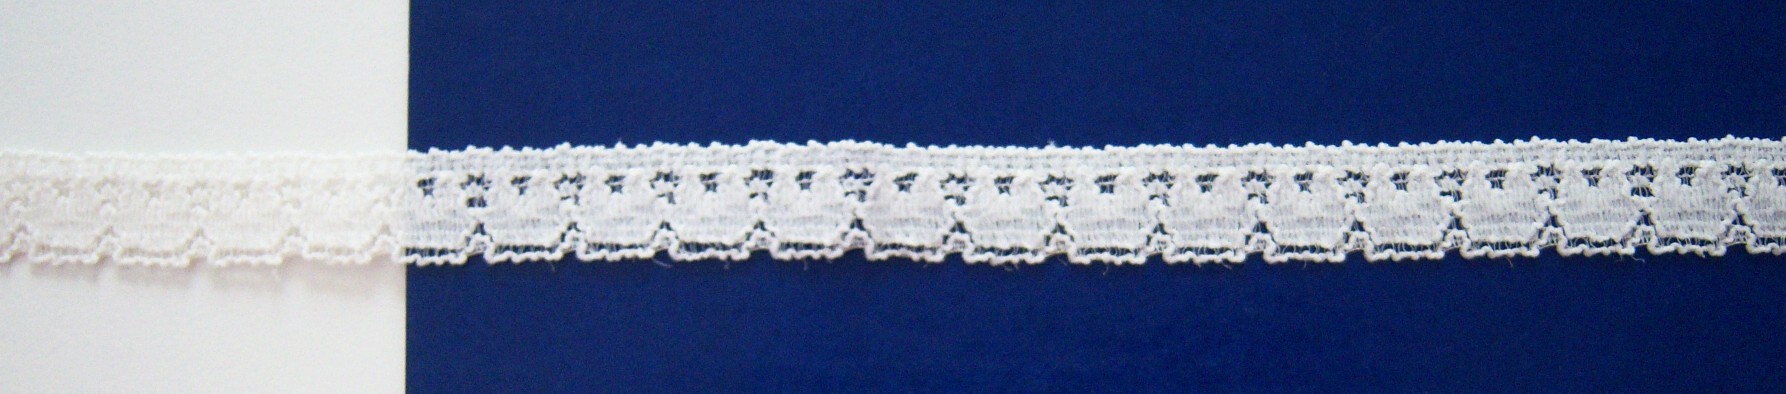 Off White 1/2" Stretch Lace